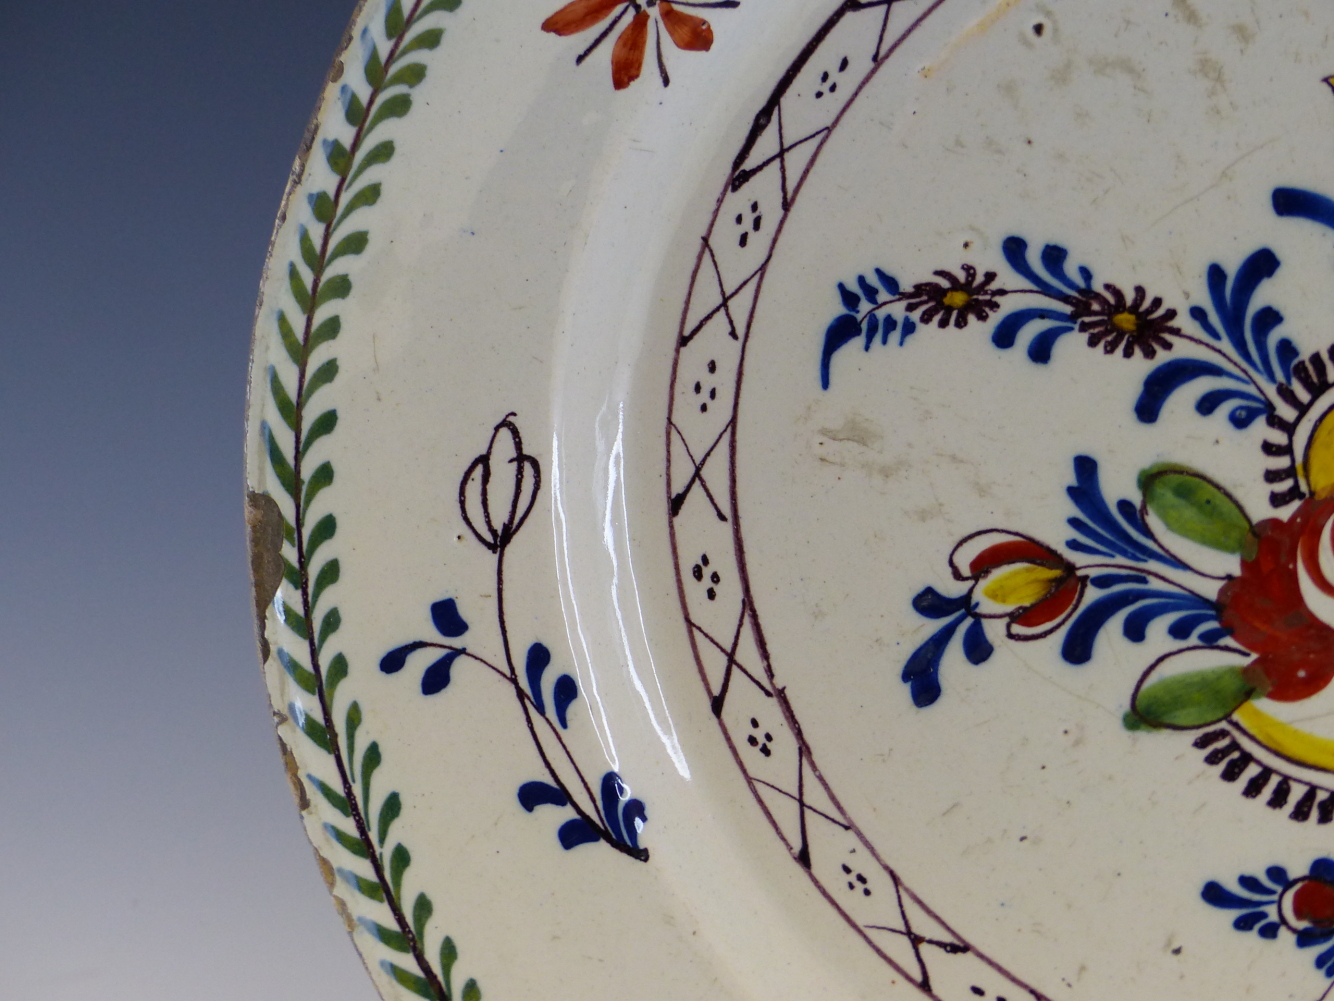 A PAIR OF MID 18th C. ENGLISH POLYCHROME DELFT DISHES PAINTED WITH CENTRAL SPRAYS OF FLOWERS - Image 11 of 20